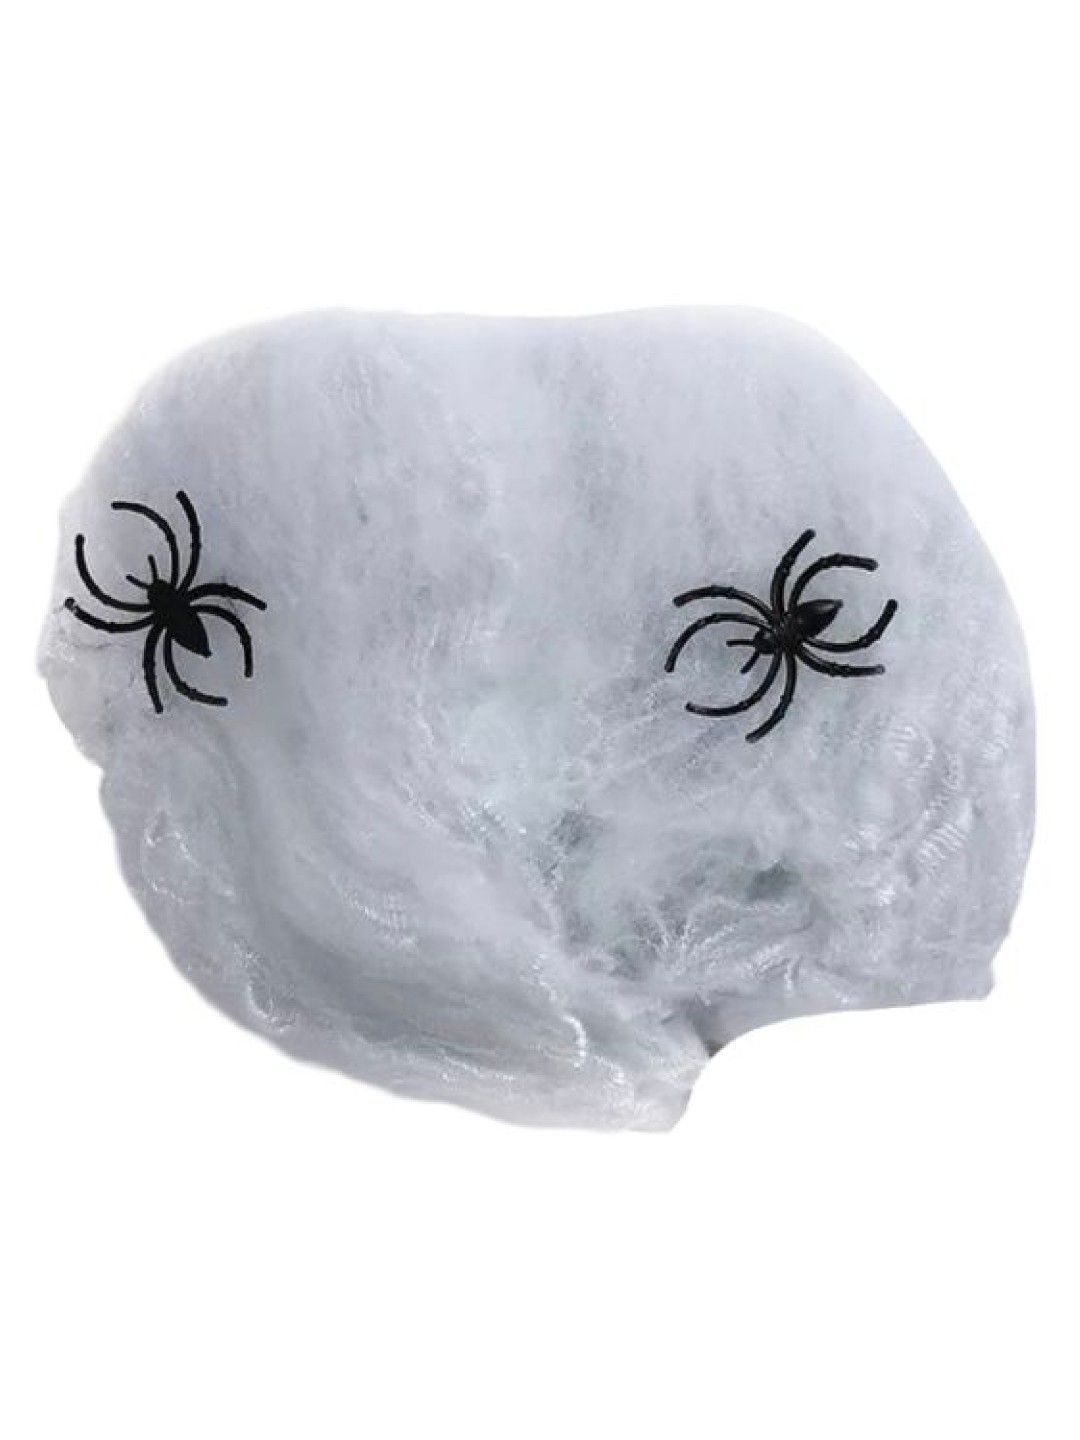 Elves of the Party Halloween Decor: Stretchable Spider Cobweb